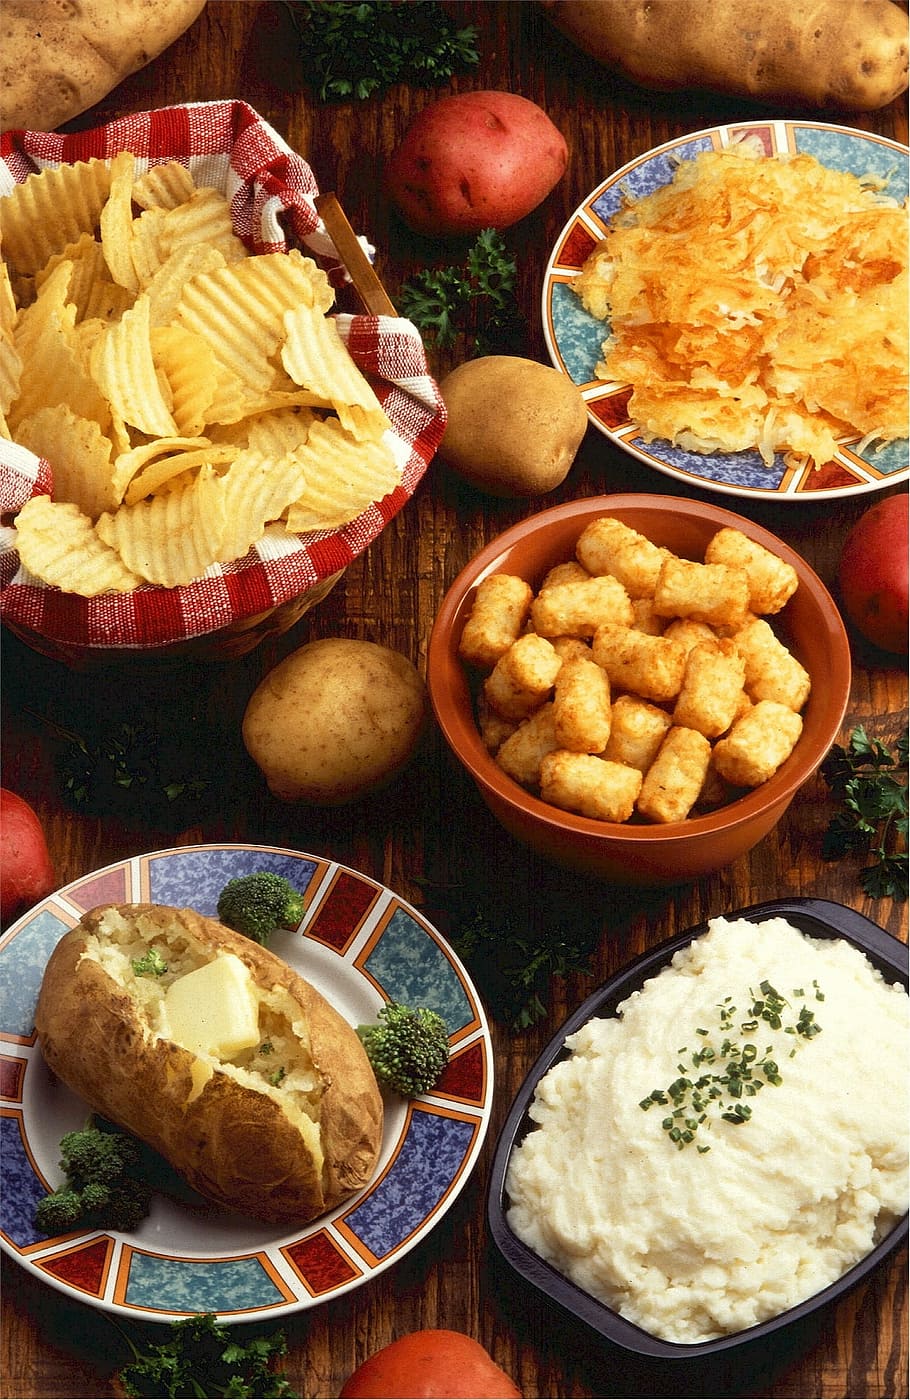 cooked potato foods, Potatoes, Dishes, Baked, Mashed, Chips, tater tots, fried, pancakes, carbohydrates